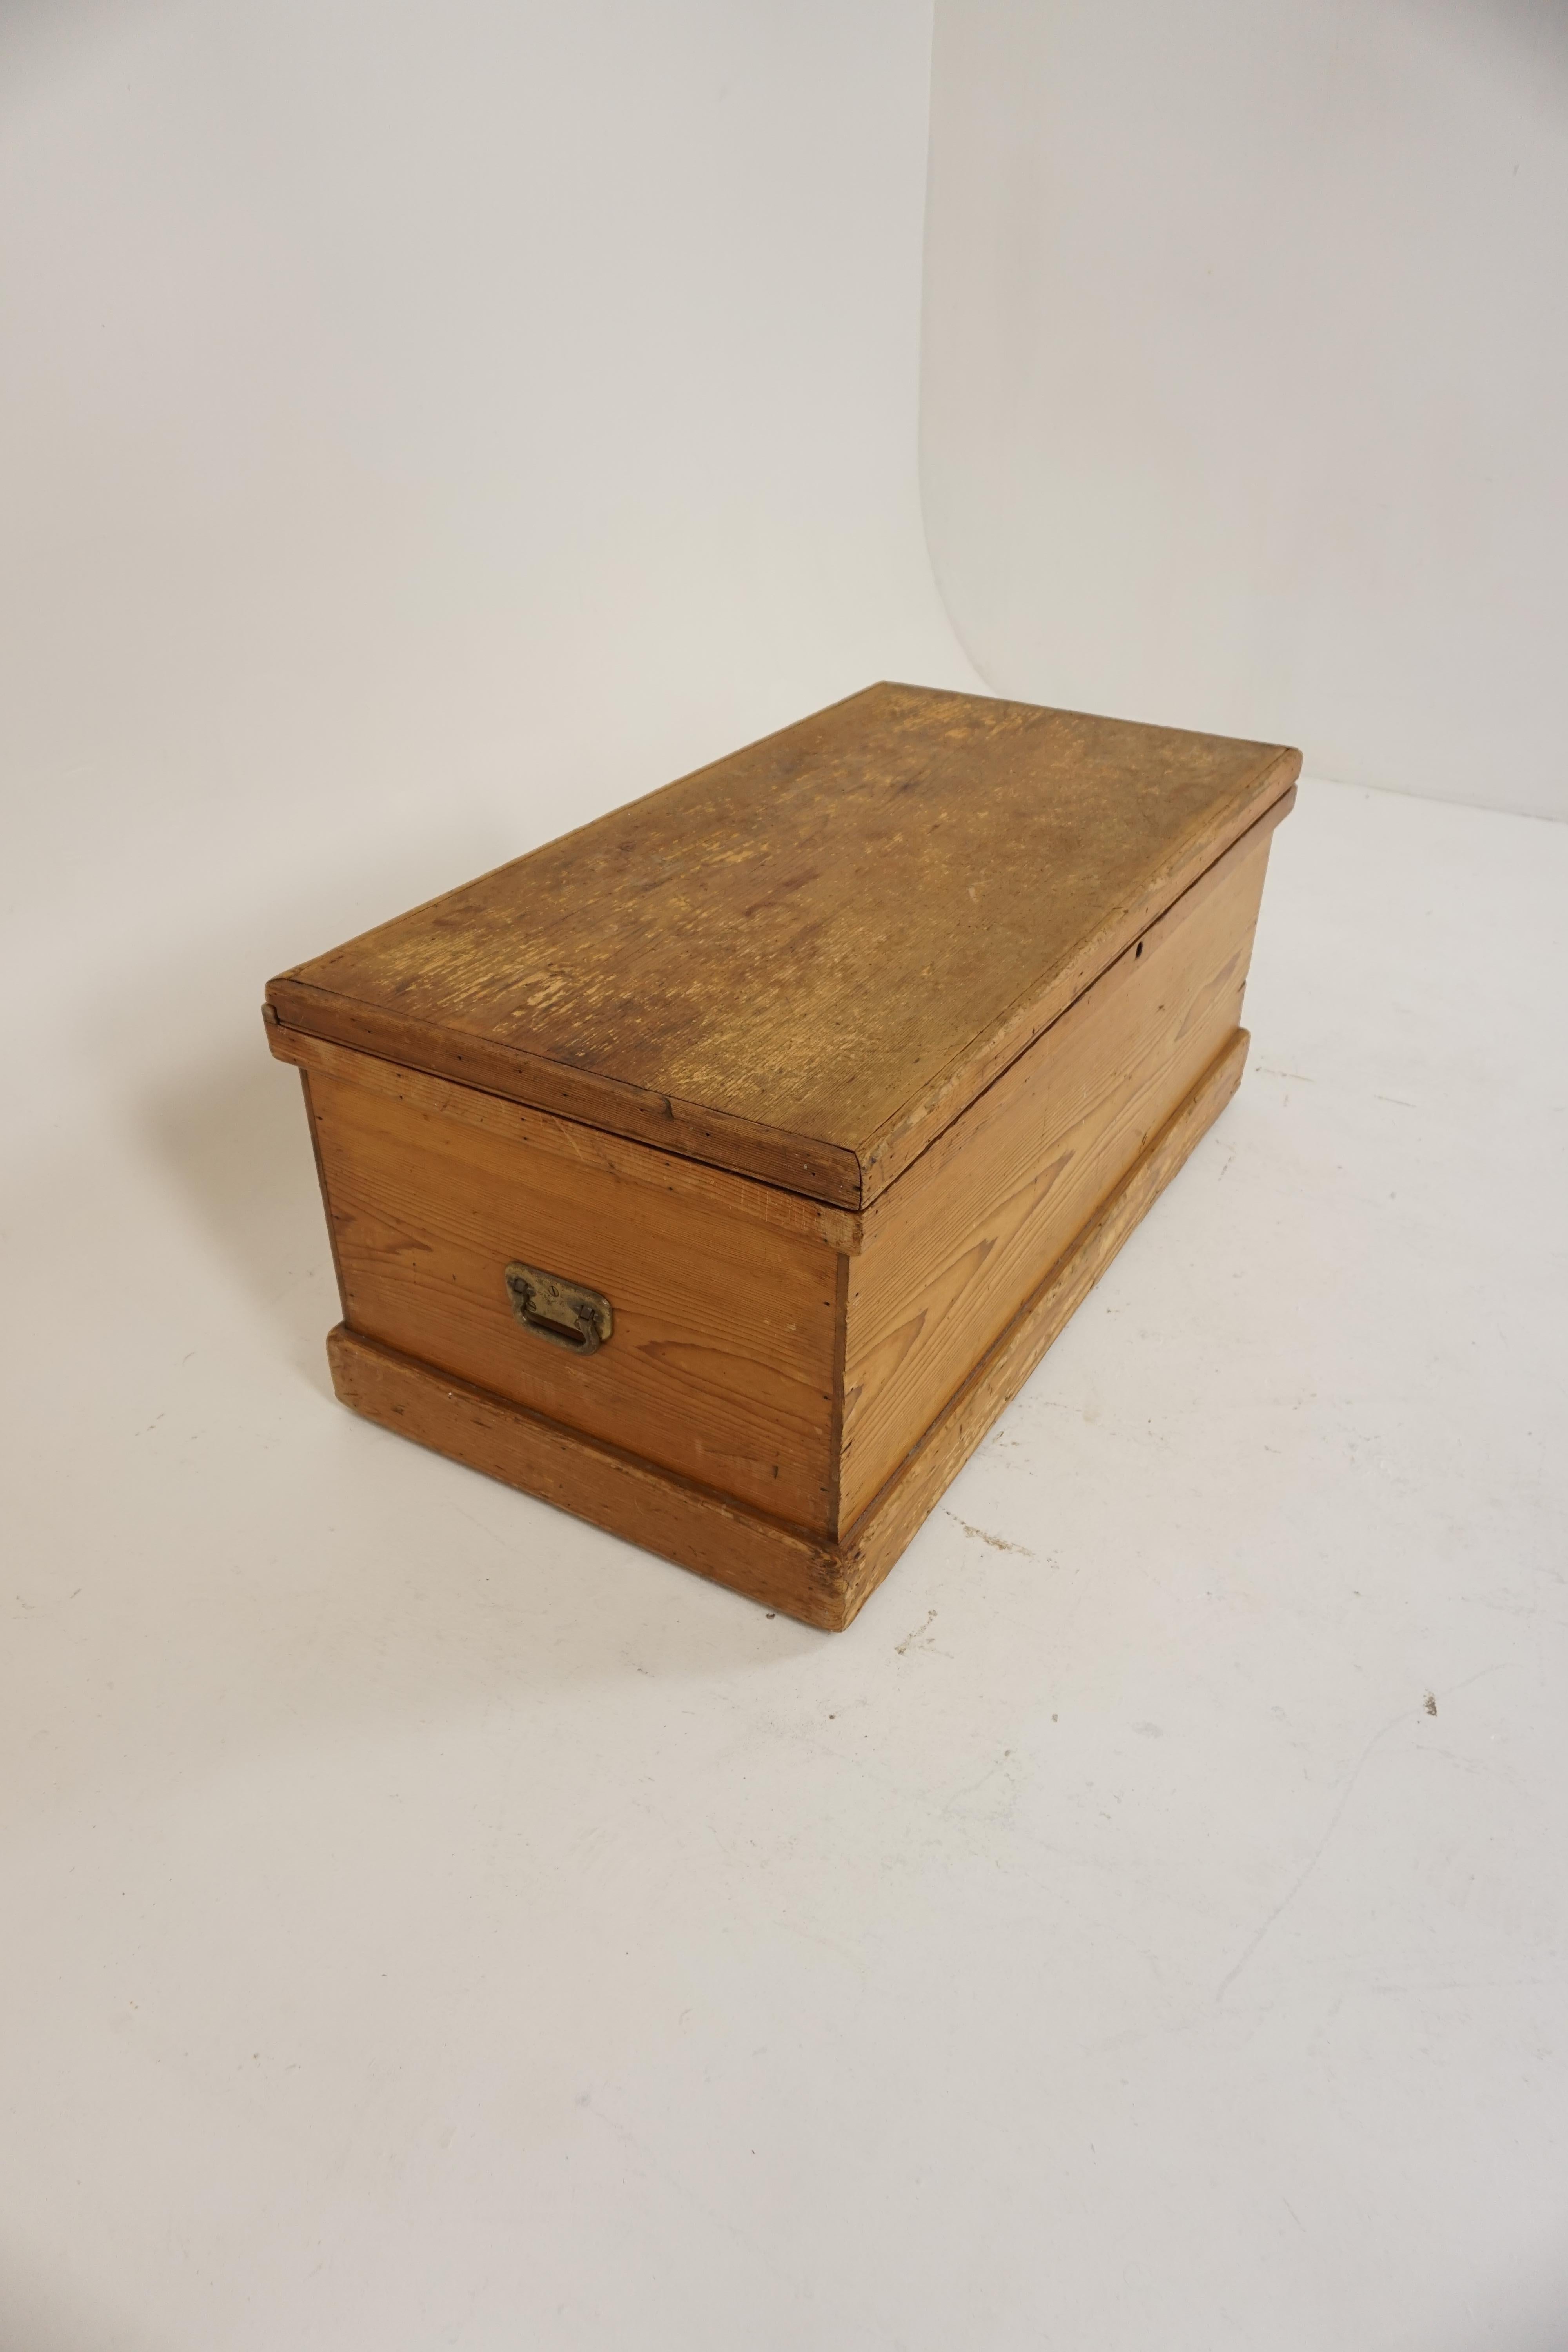 Antique large pine blanket box, trunk, chest, Scotland, 1910

Scotland, 1910
Solid pine
Original finish
Rectangular one plank top
Lid opens to reveal large storage space
Missing lock and key
Original metal handles on the side
Ending on a